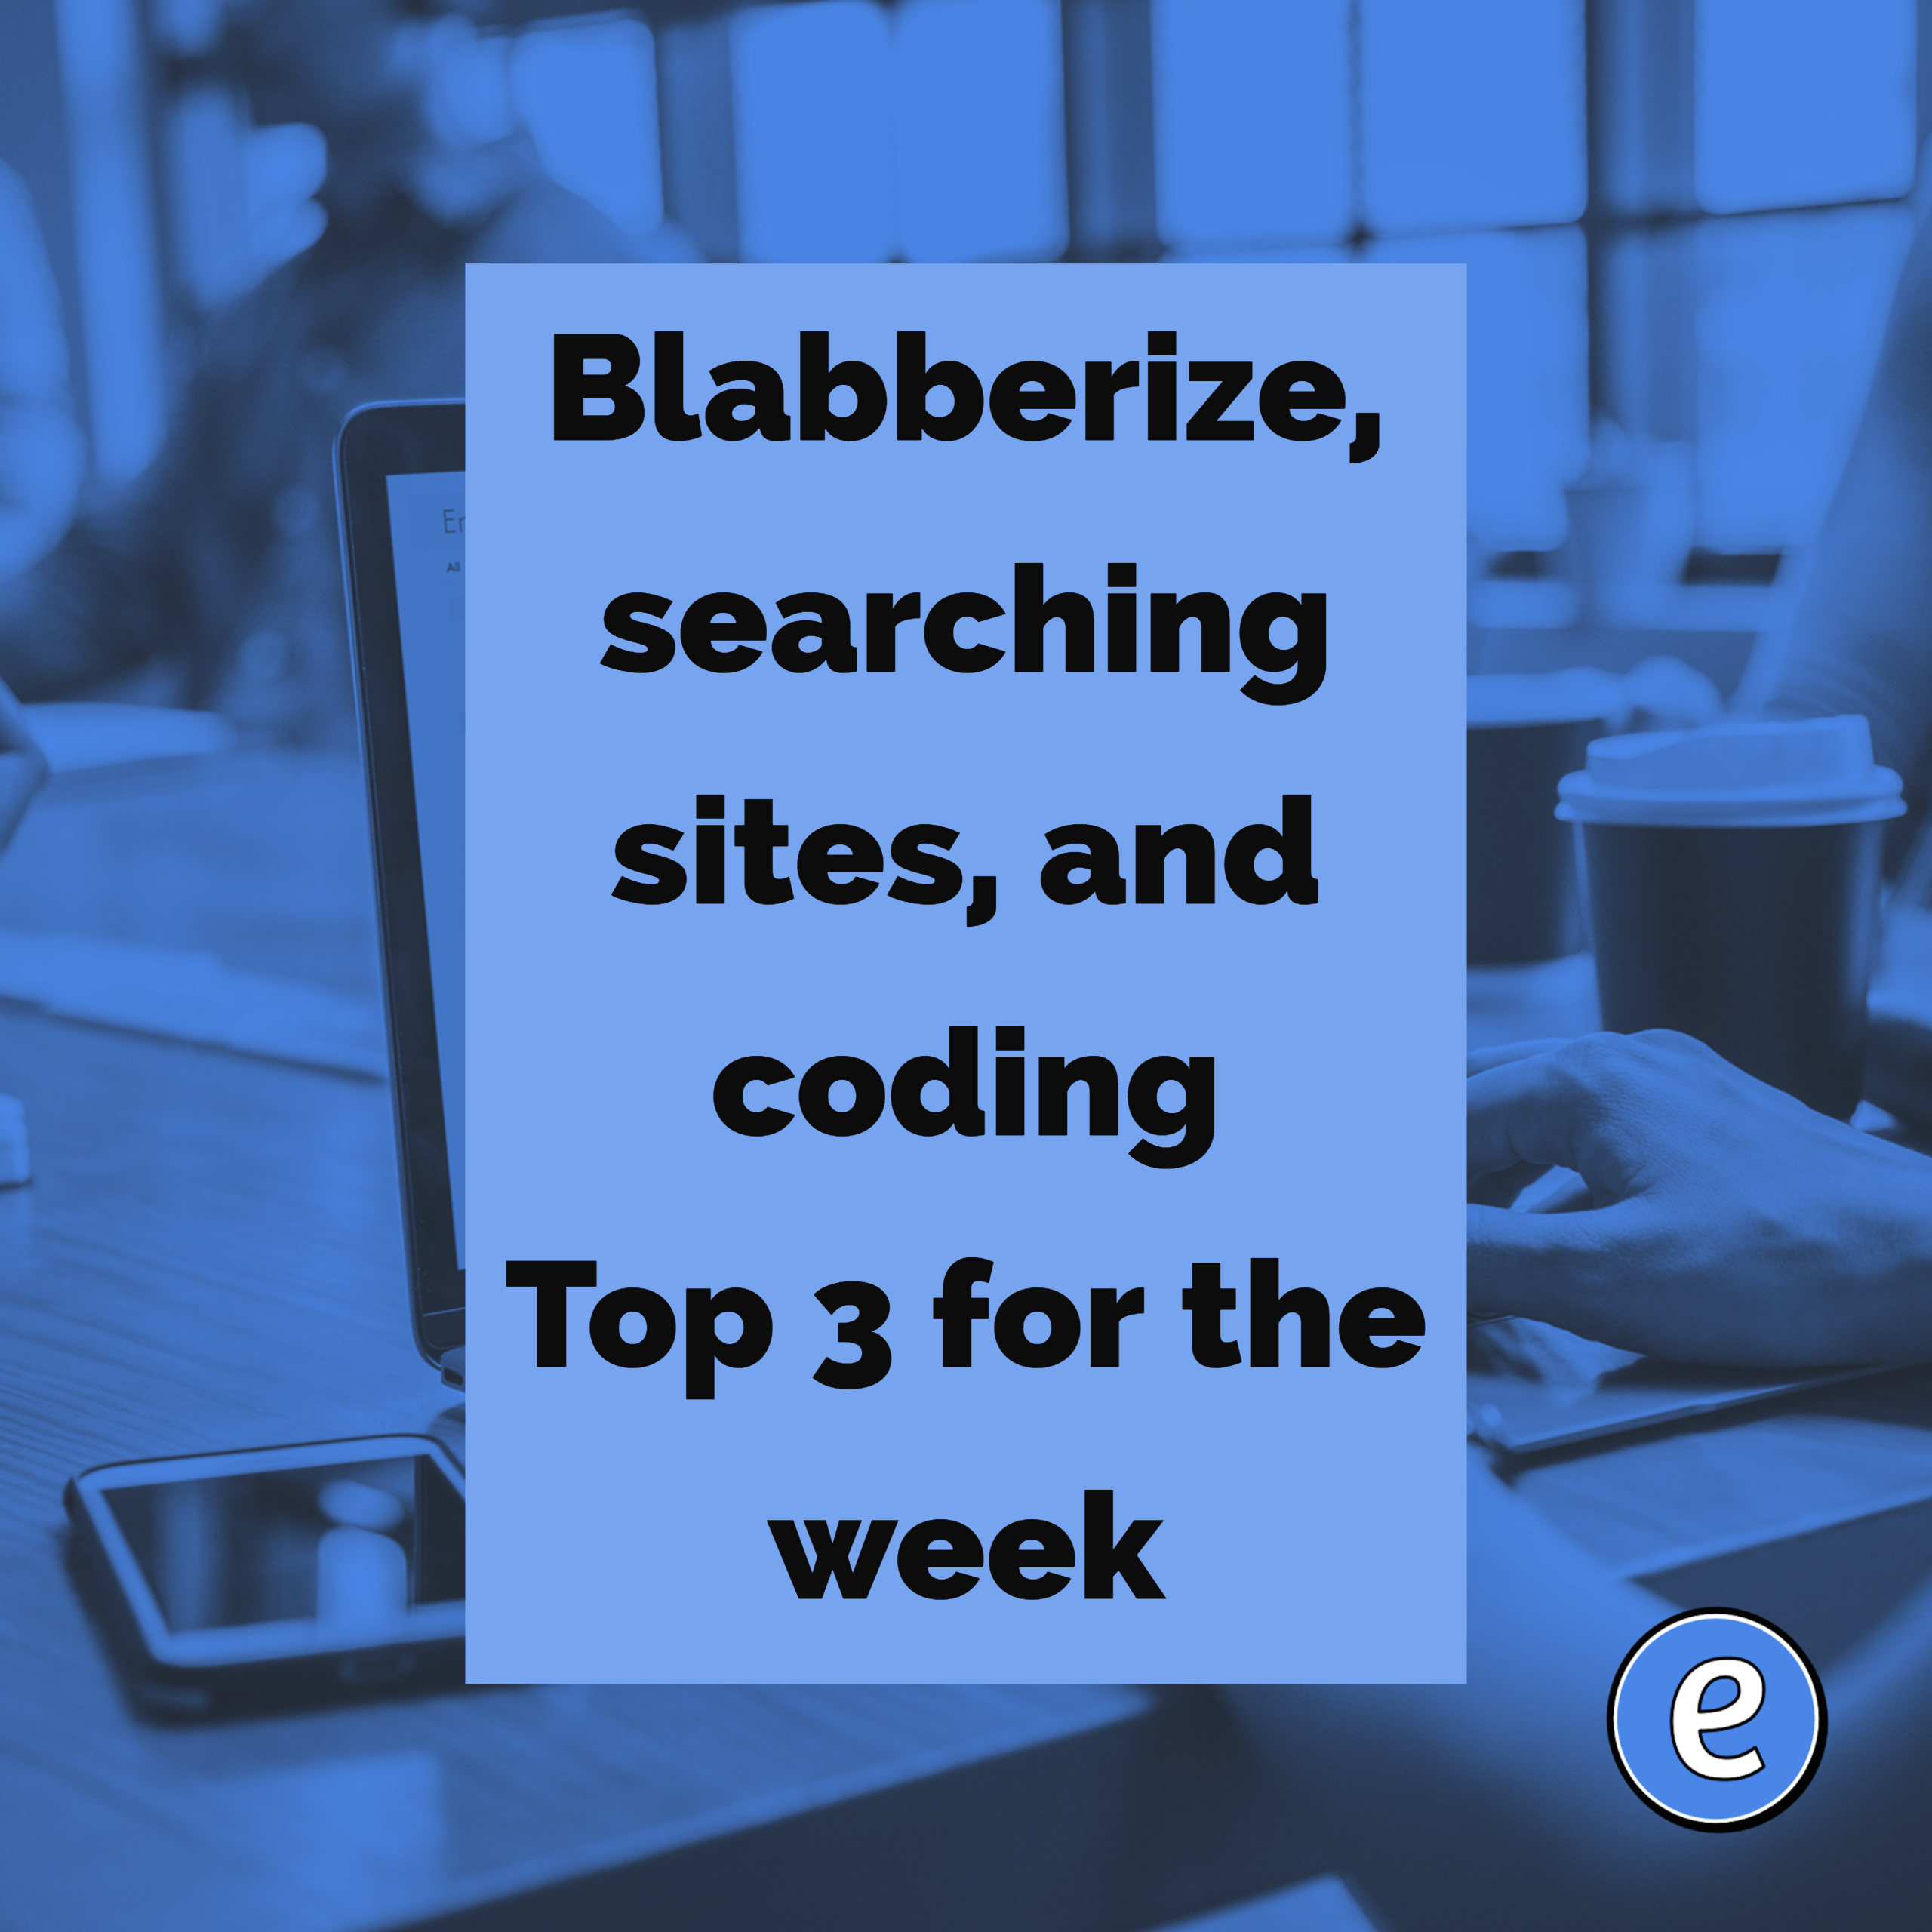 Blabberize, searching sites, and coding – Top 3 for the week